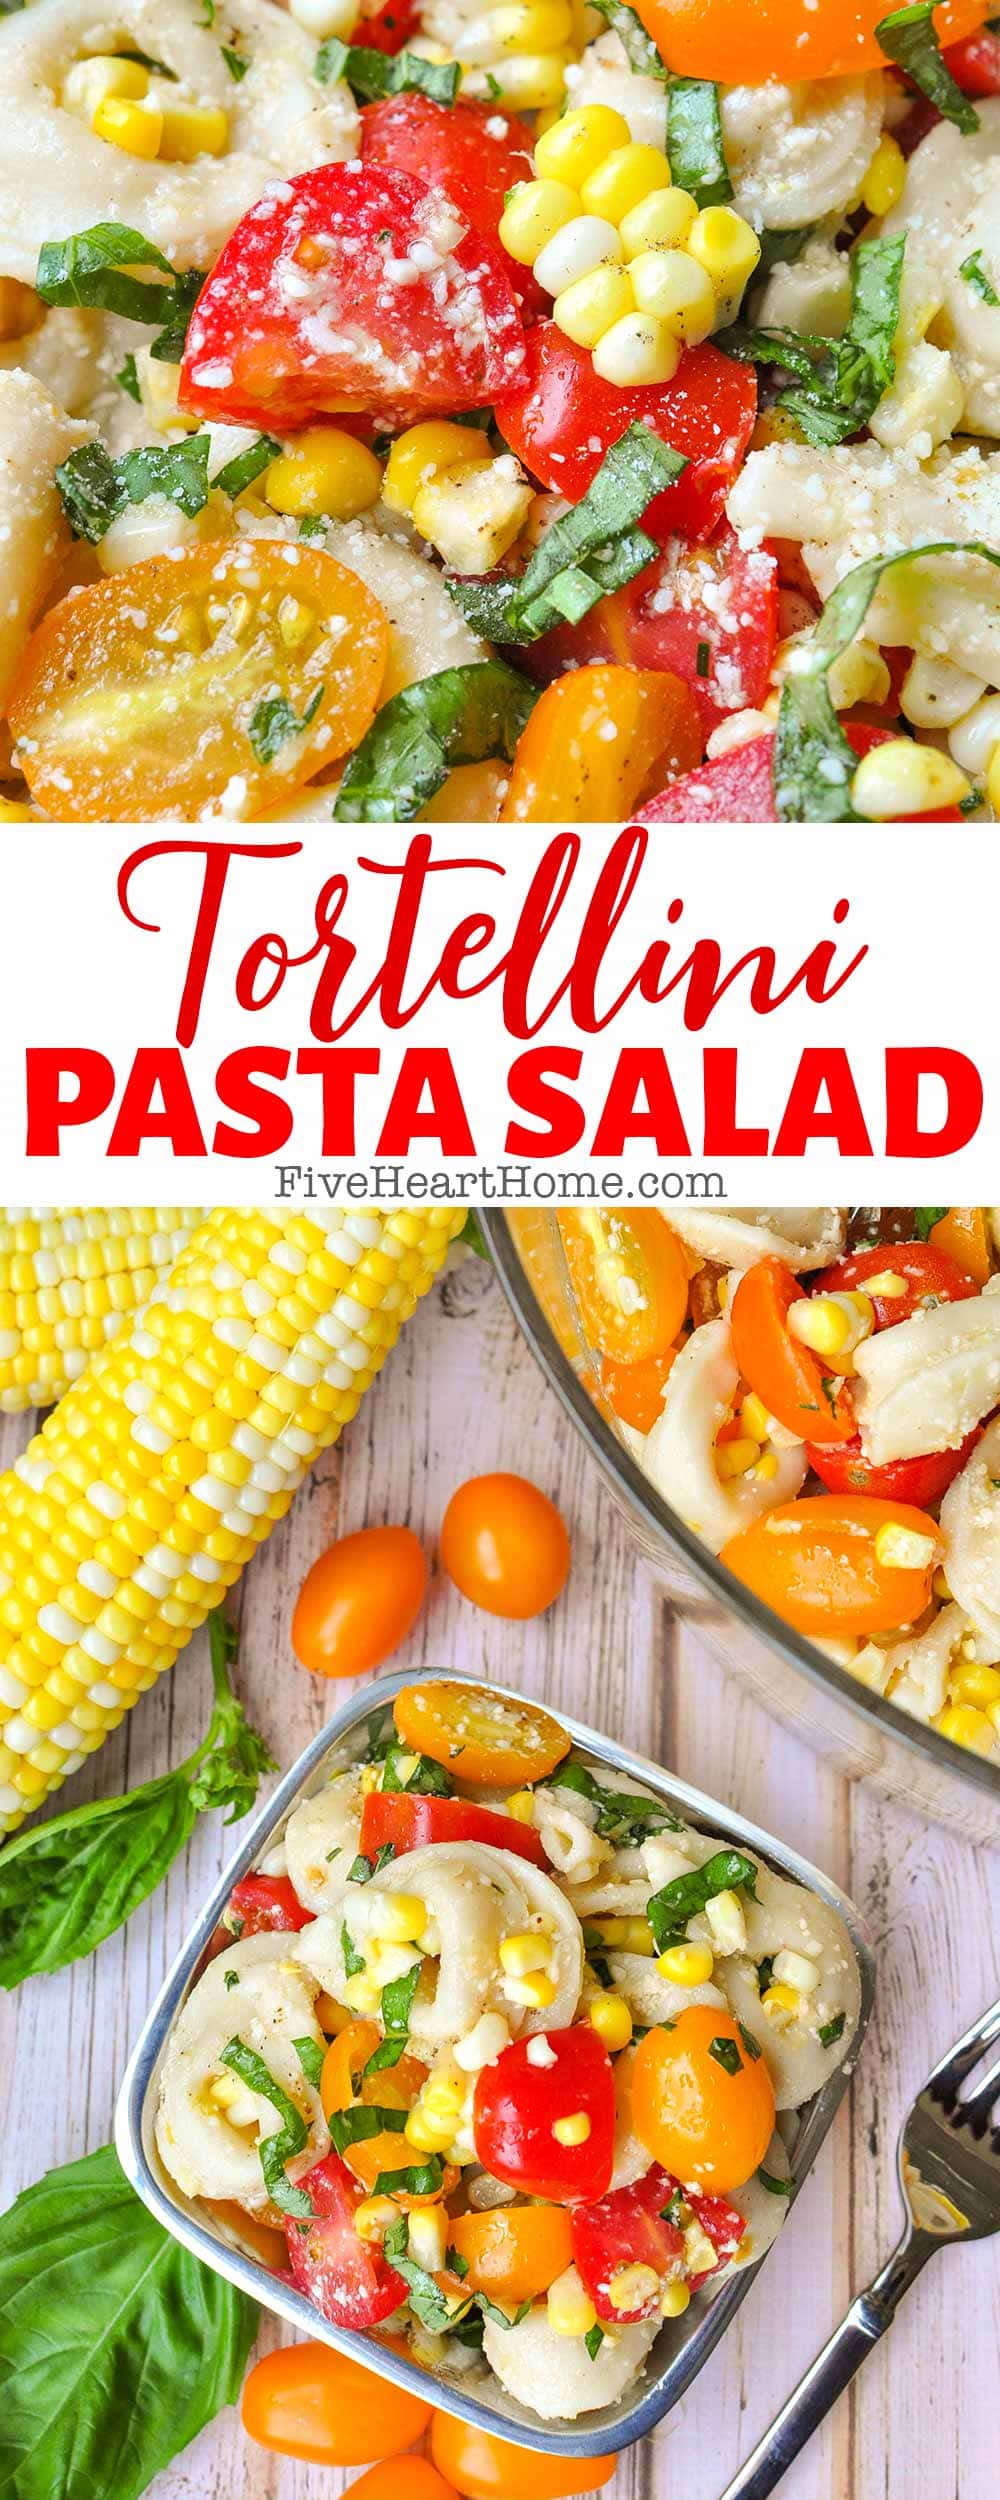 Tortellini Pasta Salad ~ studded with bright, juicy tomatoes, fresh sweet corn, ribbons of basil, and a delicious Parmesan-flecked homemade vinaigrette, this pasta salad recipe is sure to become your favorite summer side dish or light supper! | FiveHeartHome.com via @fivehearthome